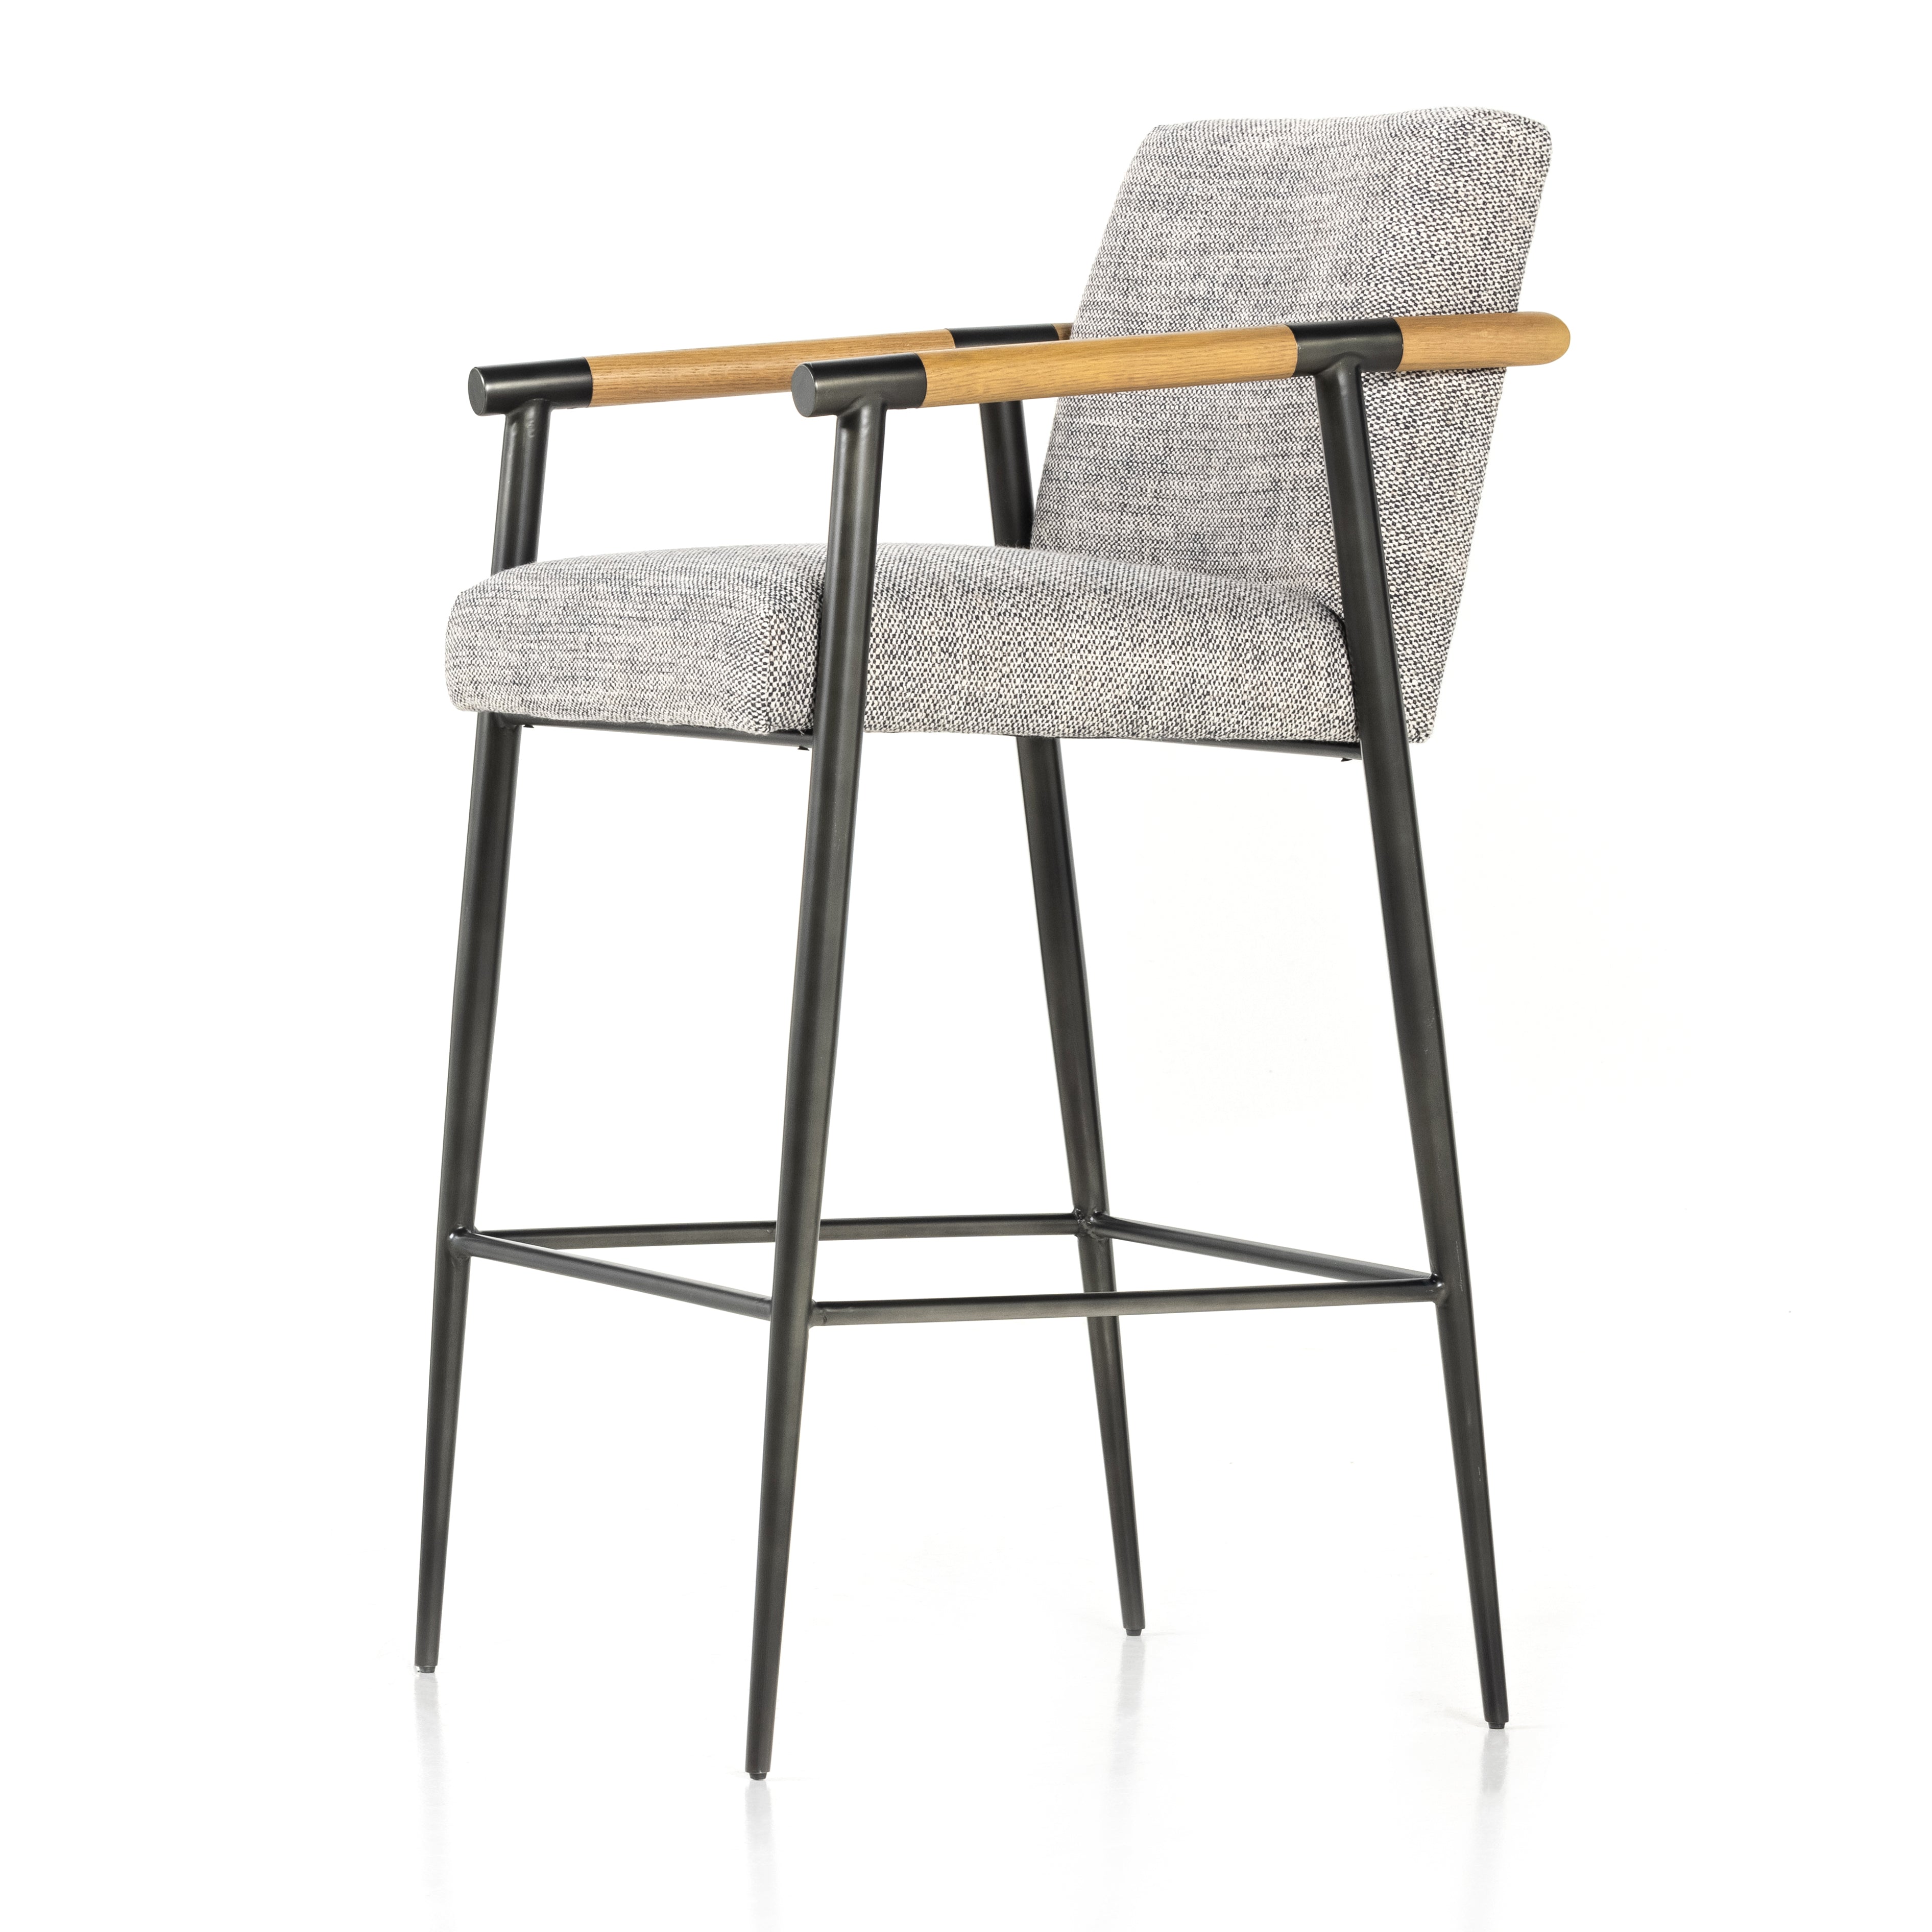 We love the textural grey seating upholstered in a high-performance fabric on this Rowen Bar + Counter Stool - Thames Raven. The angular solid oak arms and black-finished stainless steel framing is perfectly sized to elevate your bar or counter space. 